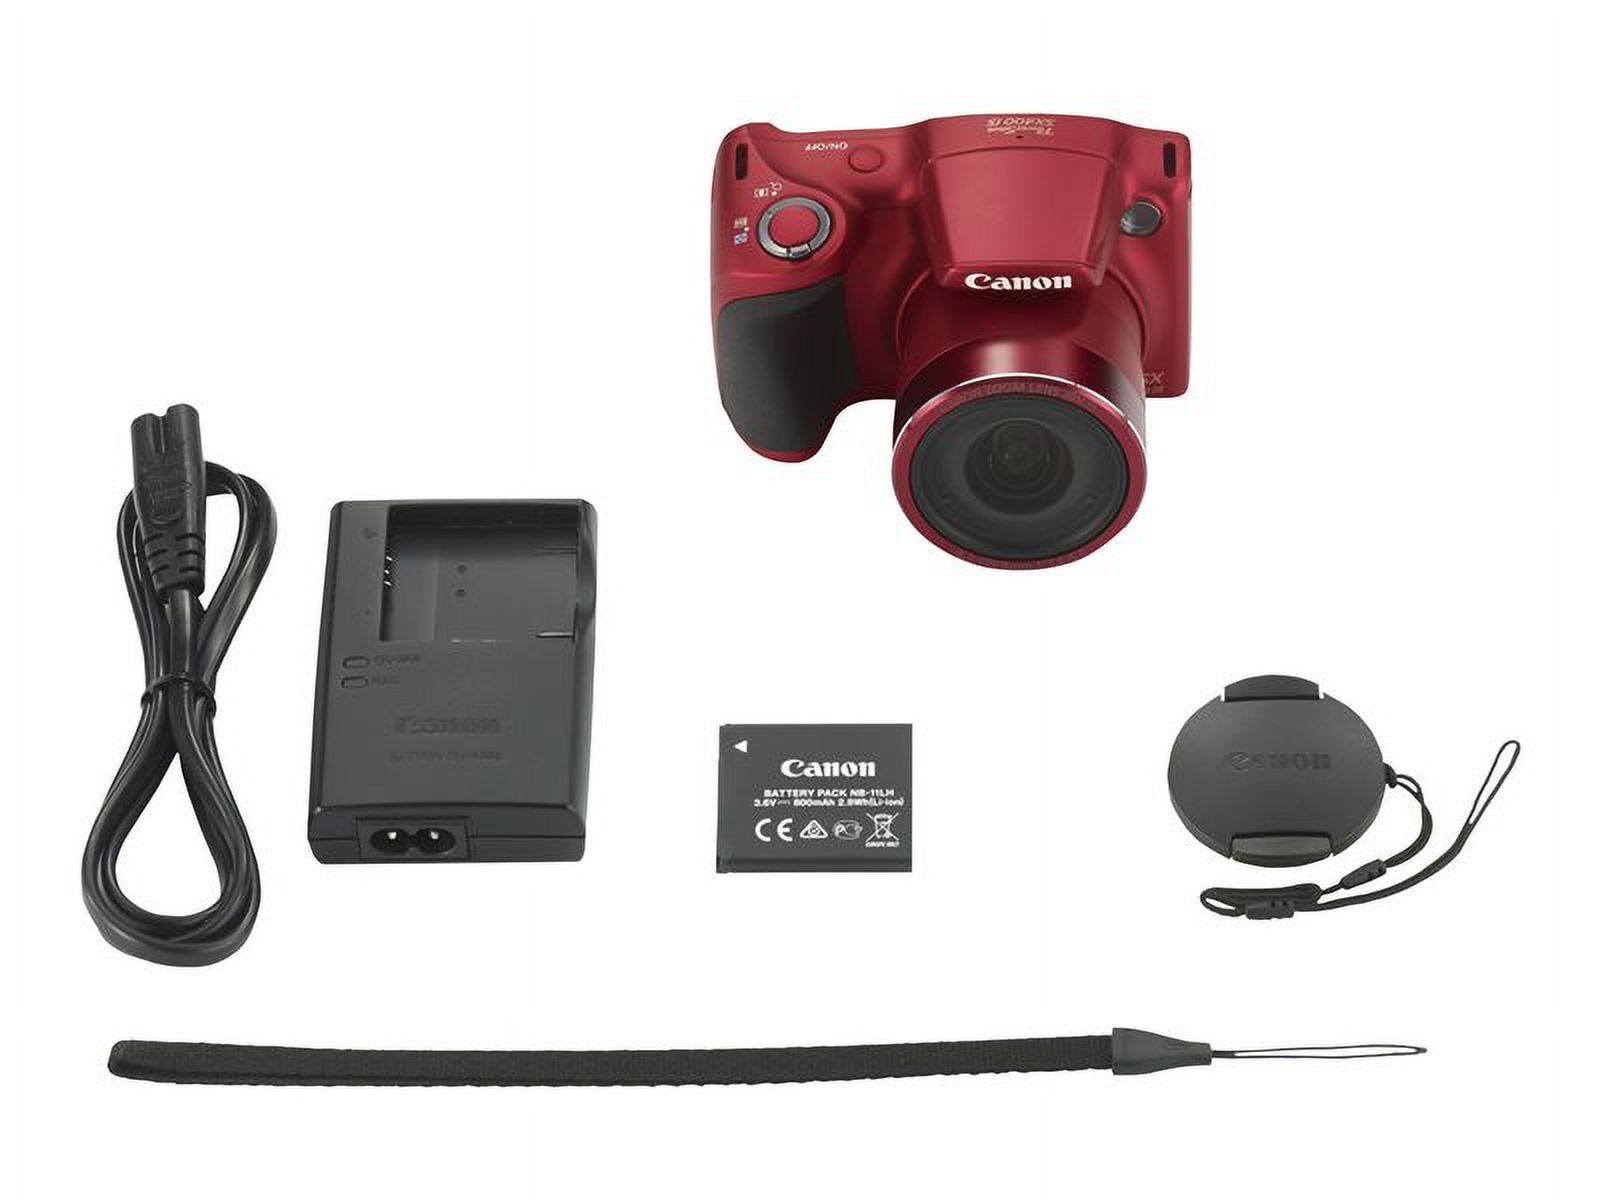 Canon PowerShot SX400 IS - Digital camera - High Definition - compact - 16.0 MP - 30 x optical zoom - red - image 50 of 72